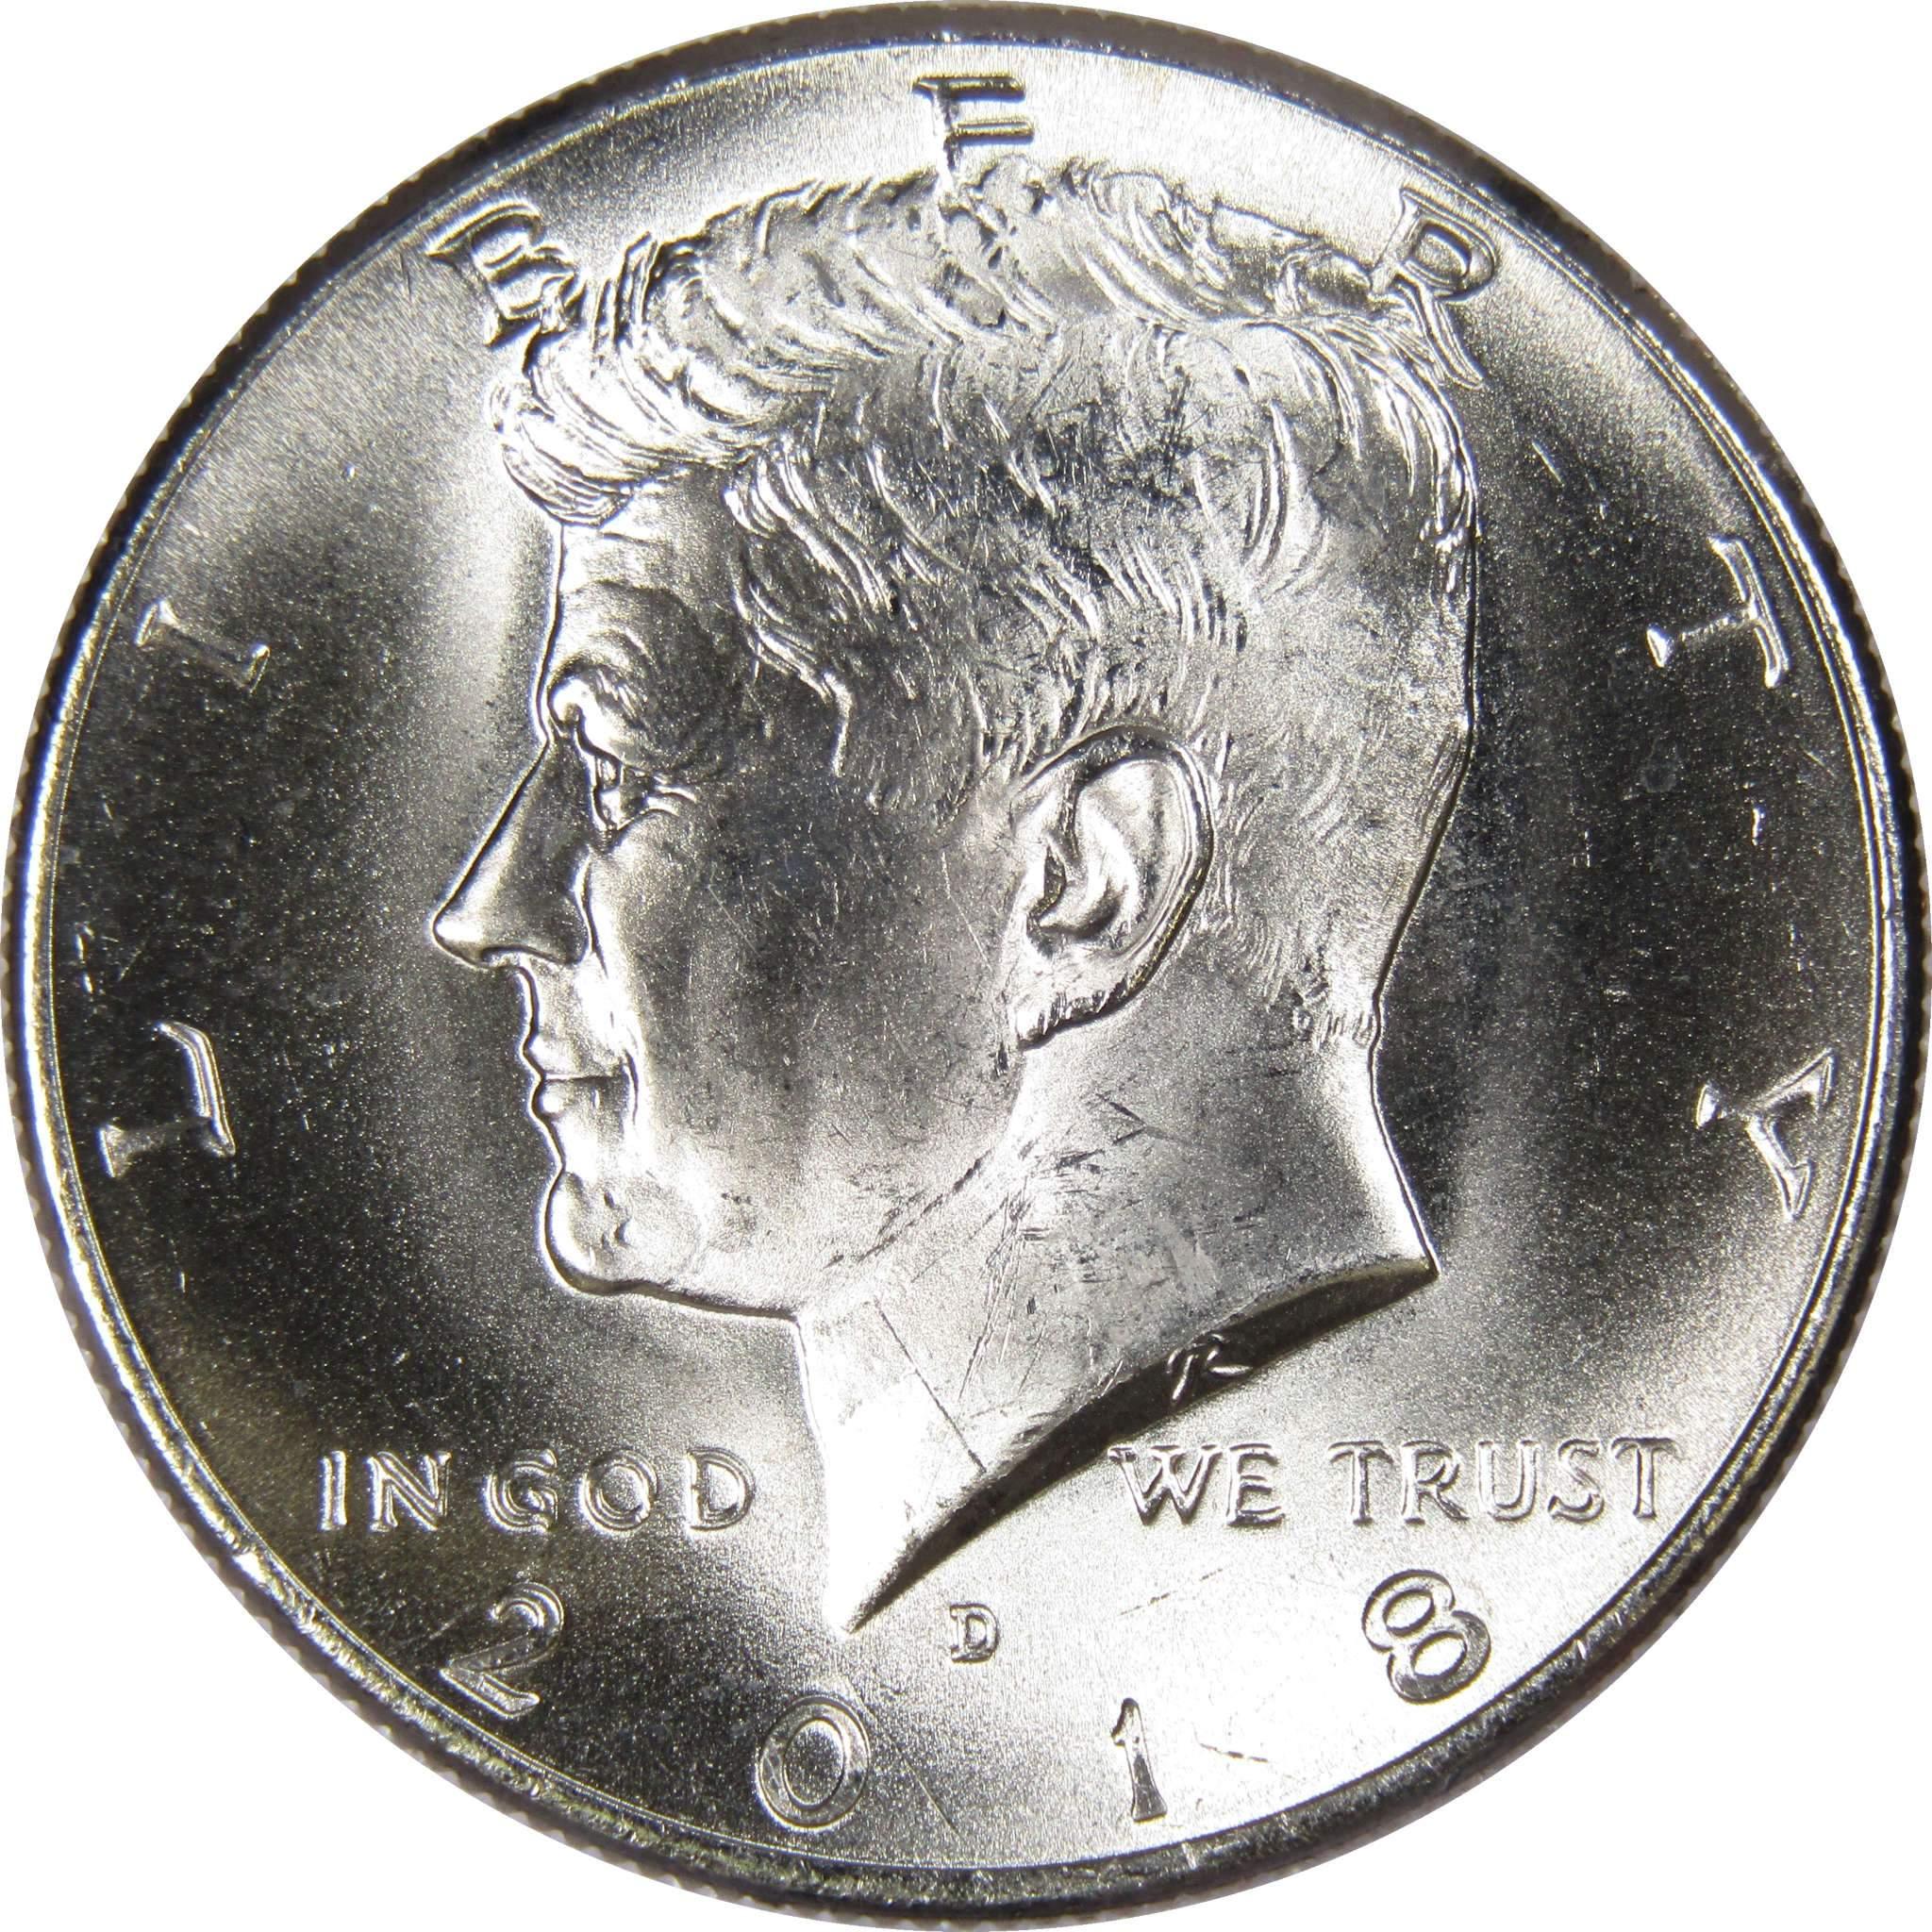 2018 D Kennedy Half Dollar BU Uncirculated Mint State 50c US Coin Collectible